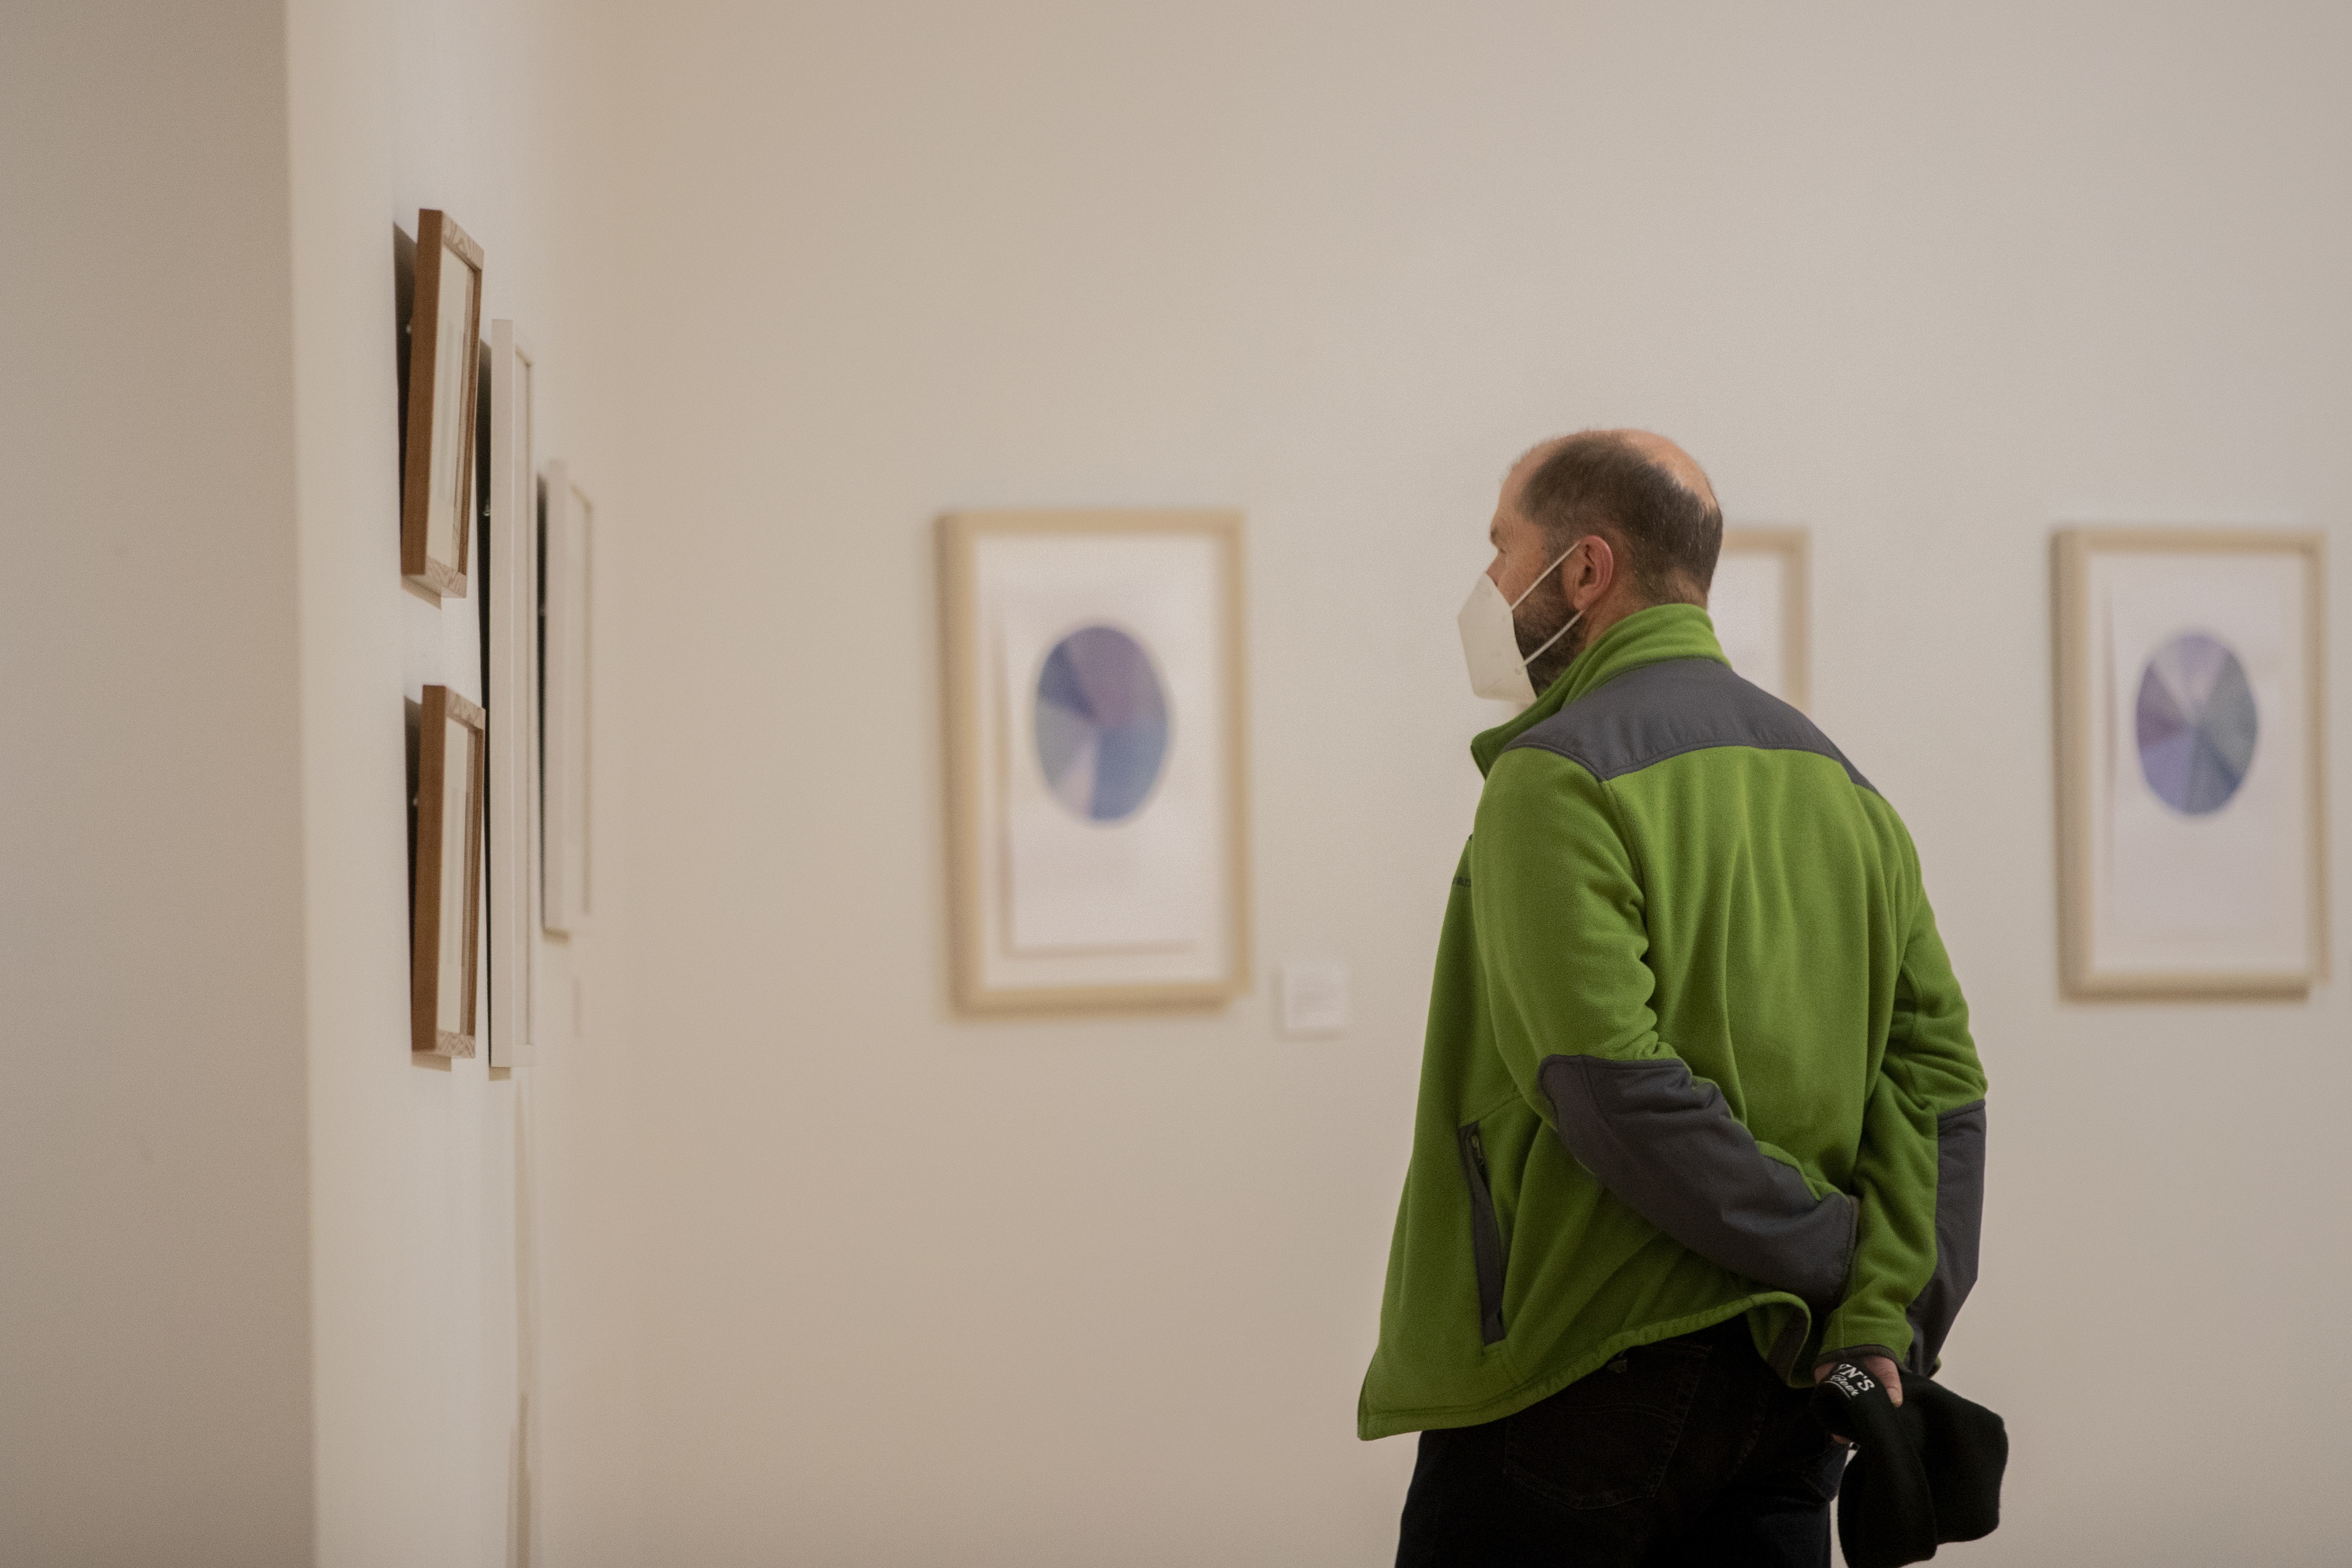 An individual looking at art hanging on the wall in a gallery